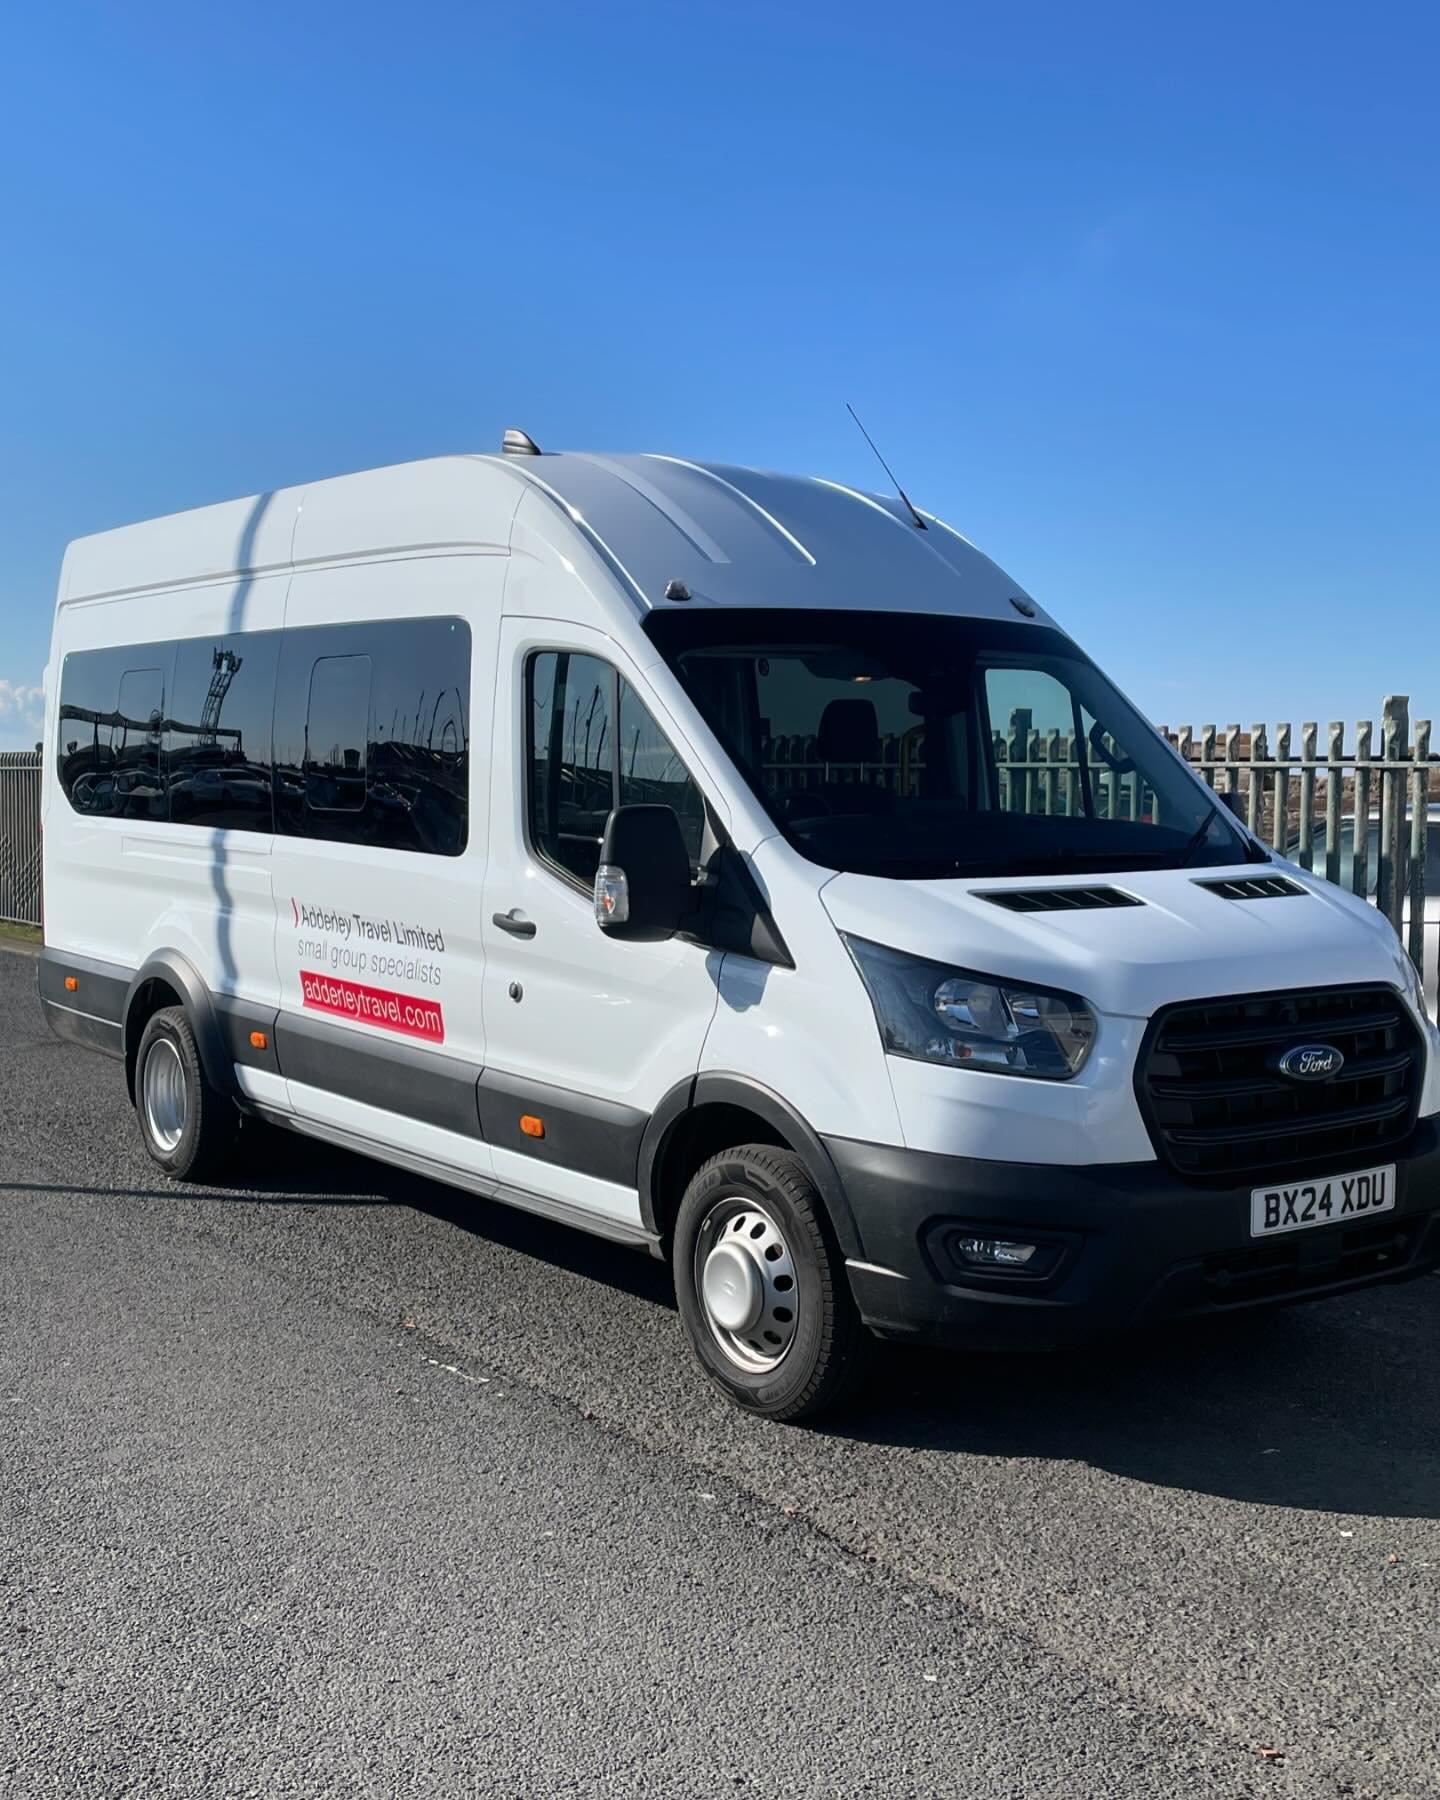 And we are off! 

The first day of the first tour of the season to the Glorious Argyll - in our new WHITE minibus. It might take a little while to get used to the colour but we are thankful to @barfordhire for getting us on the road in our smart new 